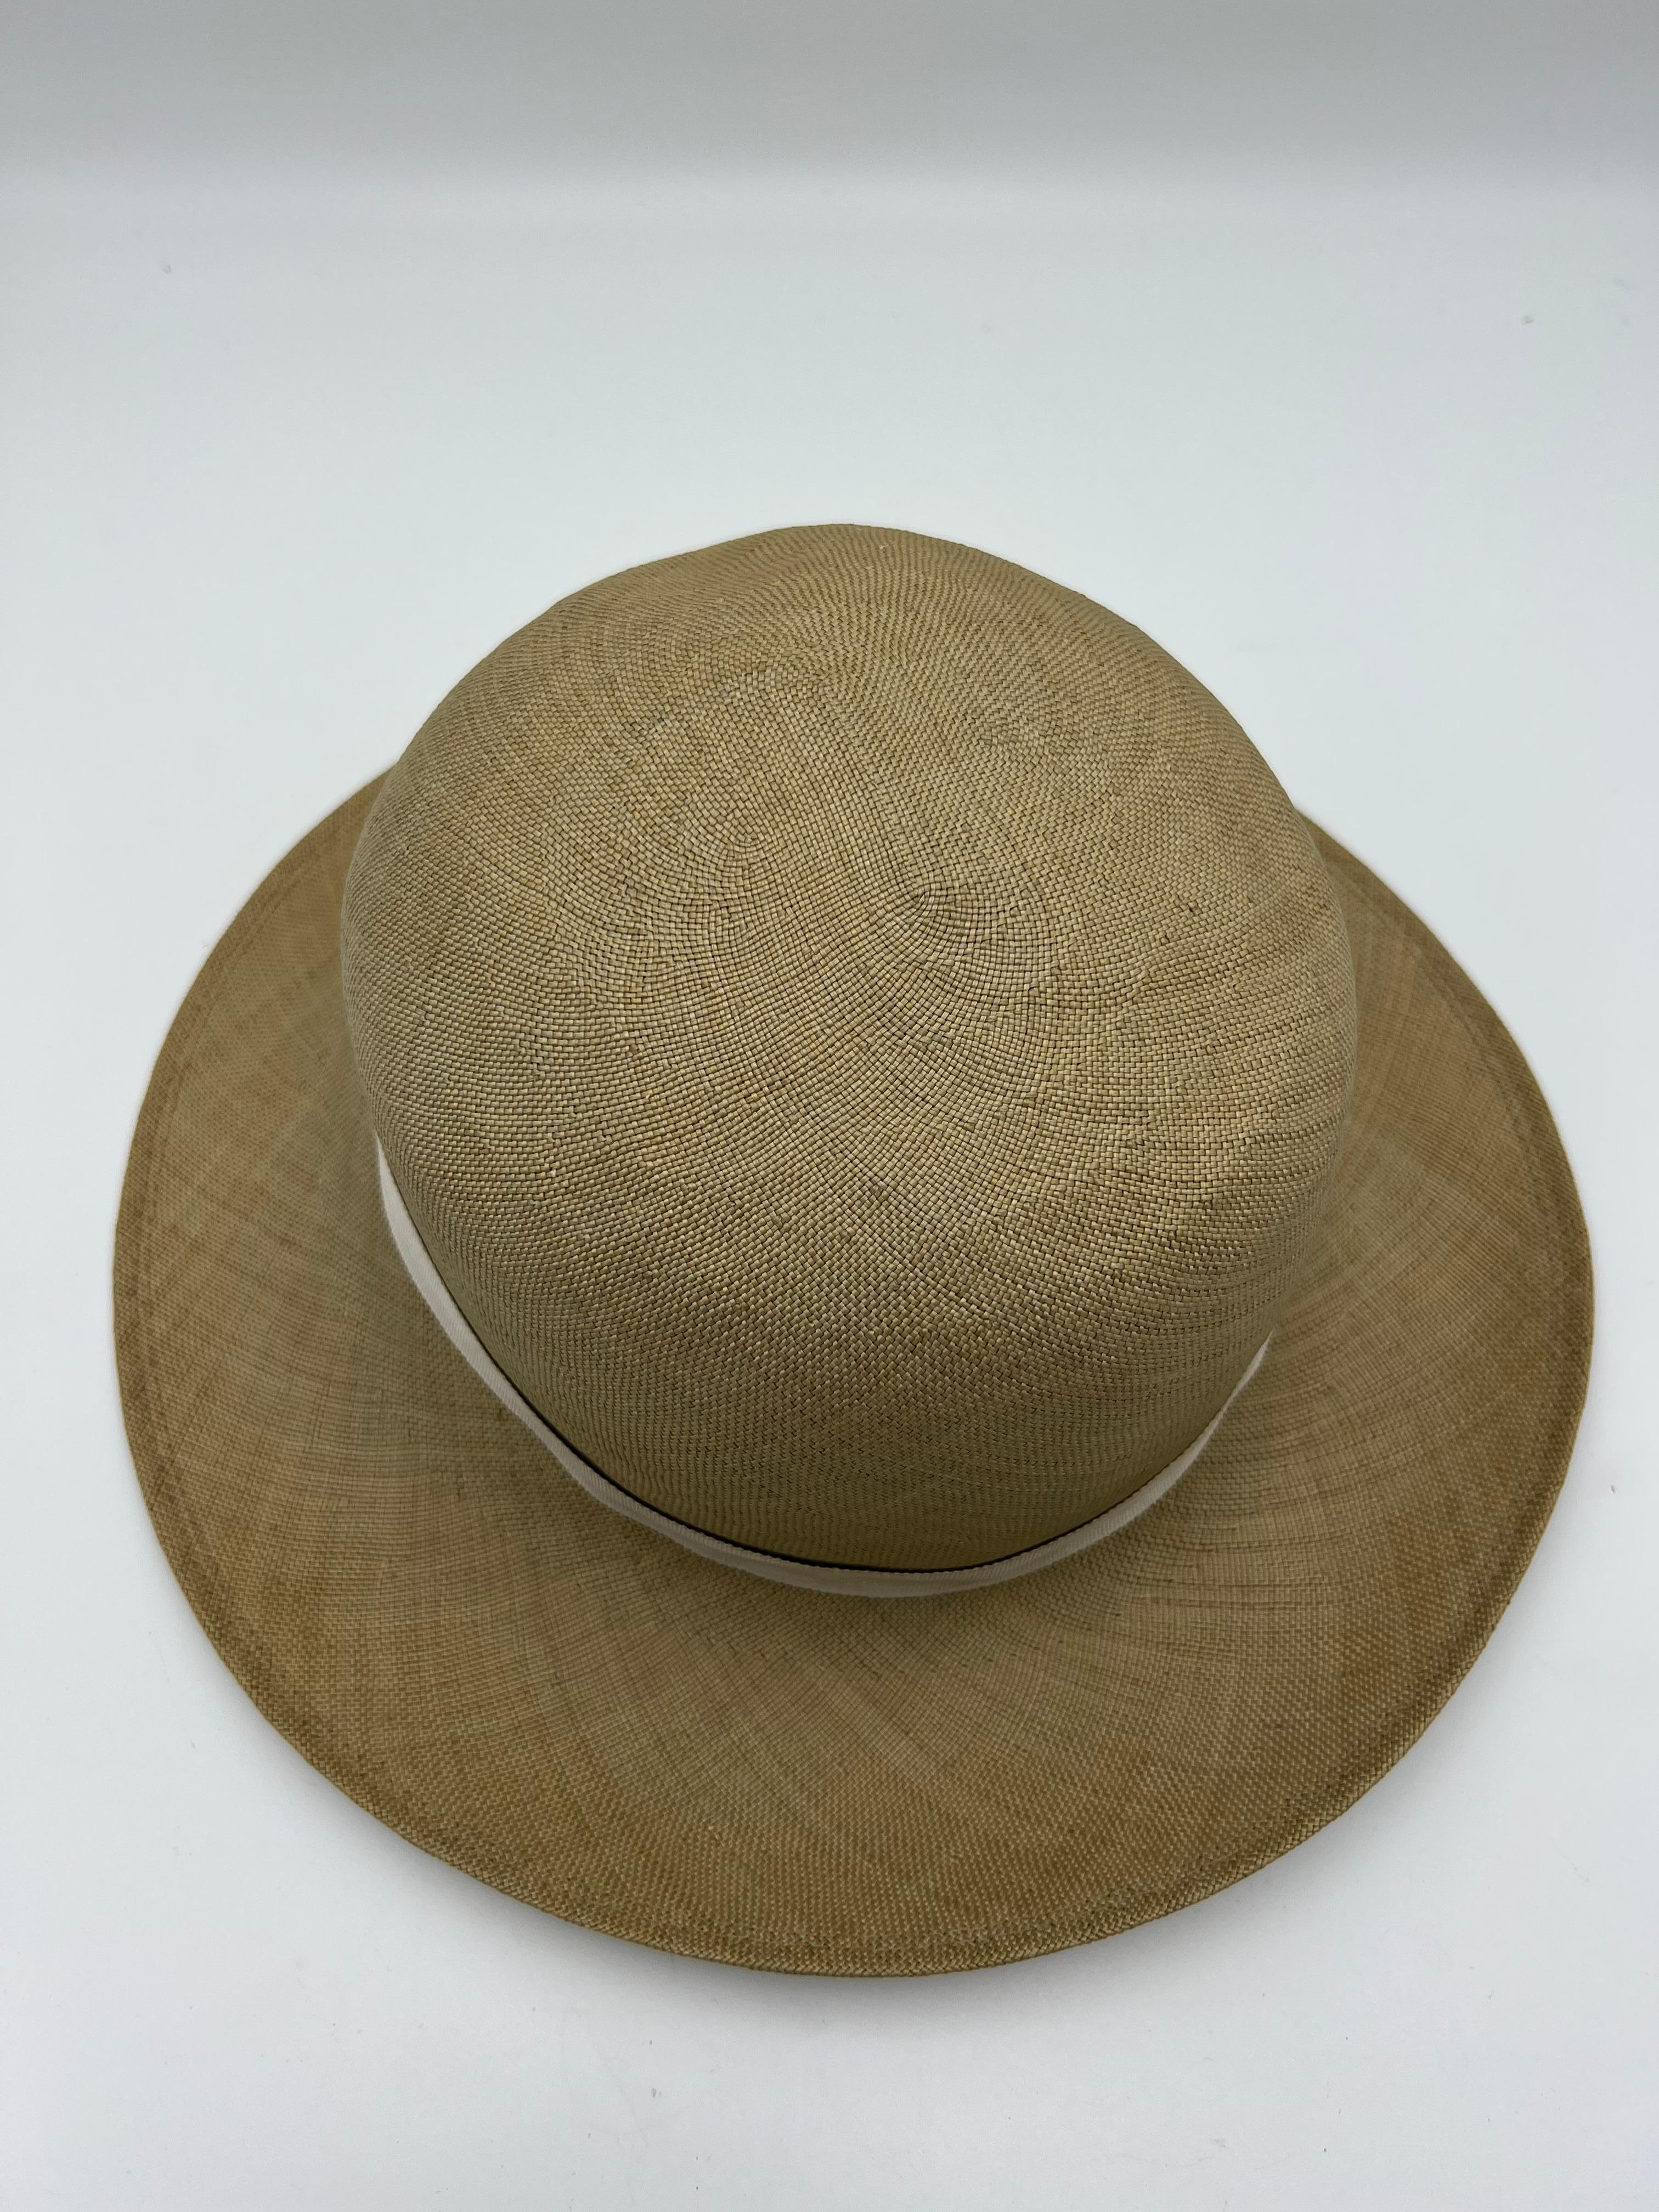 Product details:

Vintage hat designed by Yves Saint Laurent, featuring straw finish with lighter colored ribbon. Fits small size head. 

Measurements: the outer diameter is 11.5”, the inner diameter is 7.5”, inner circumference is 21” and the